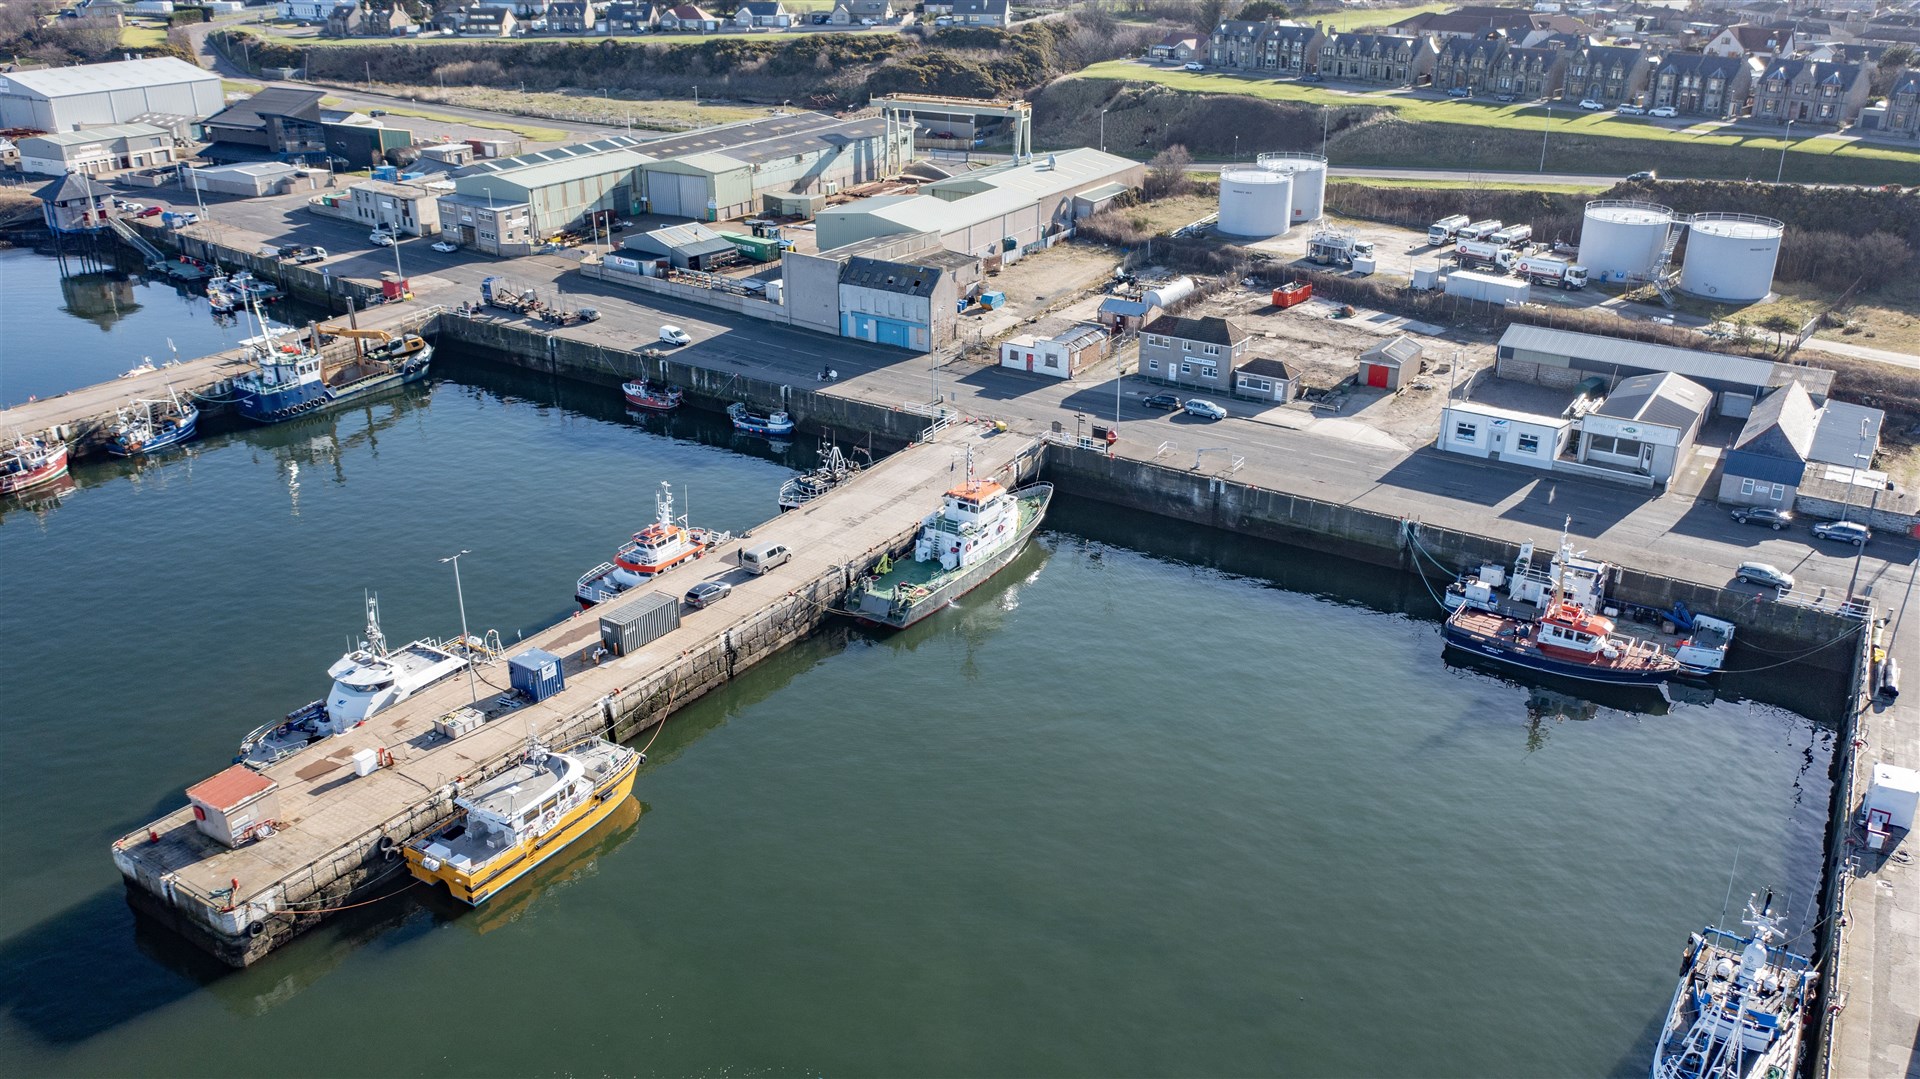 Work is continuing to prepare the basin at pier 3 of Buckie Harbour to serve as a wind farm O&M base.